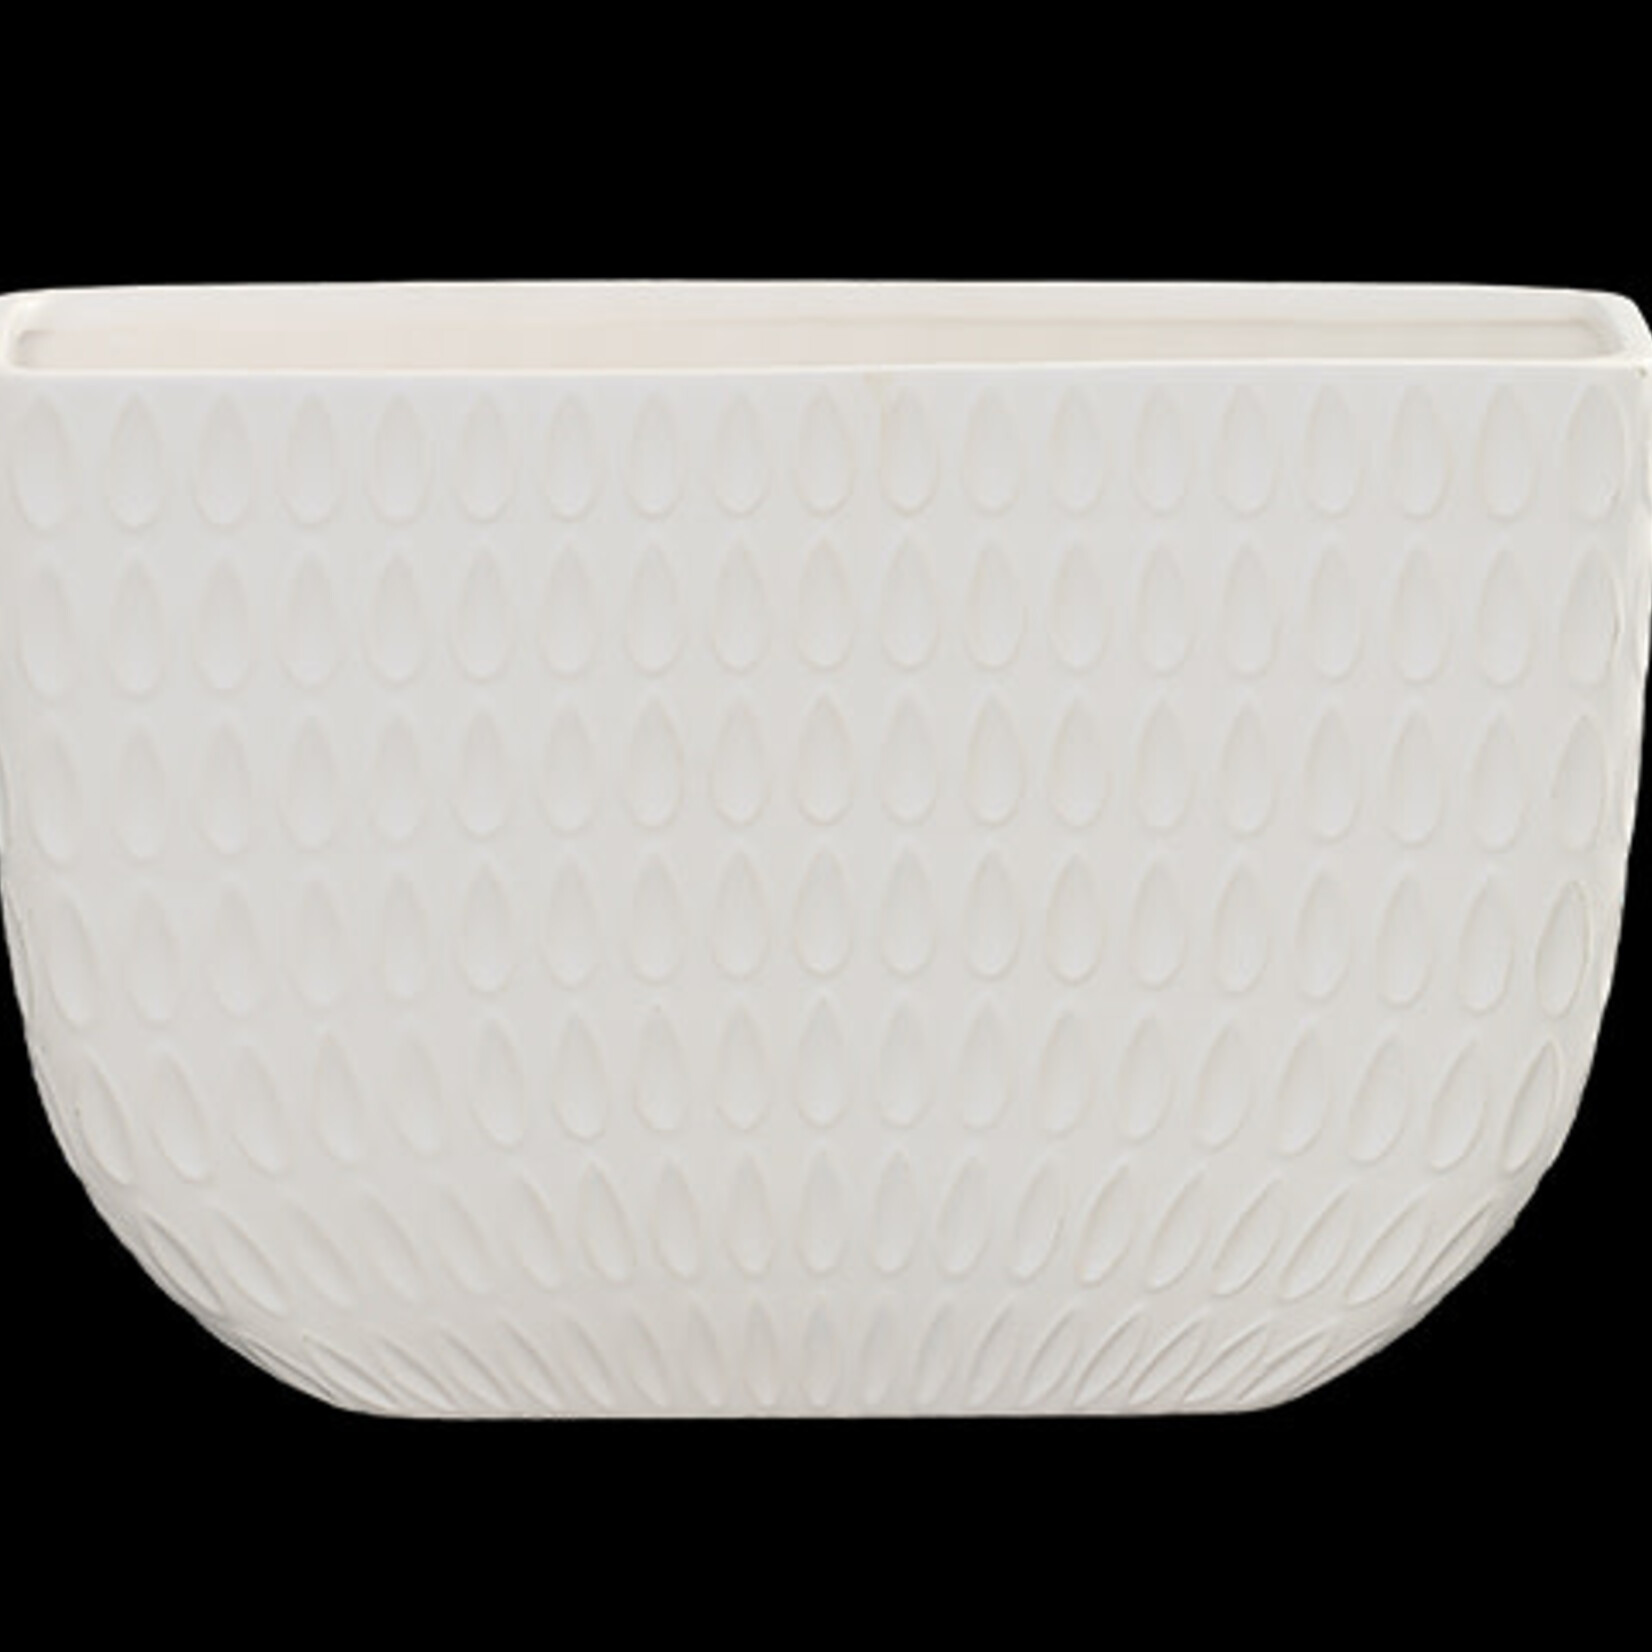 9.25"H X 5" X 14”L WHITE Ceramic Rectangle Vase with Pressed Elliptical Pattern Design Body and Tapered Bottom